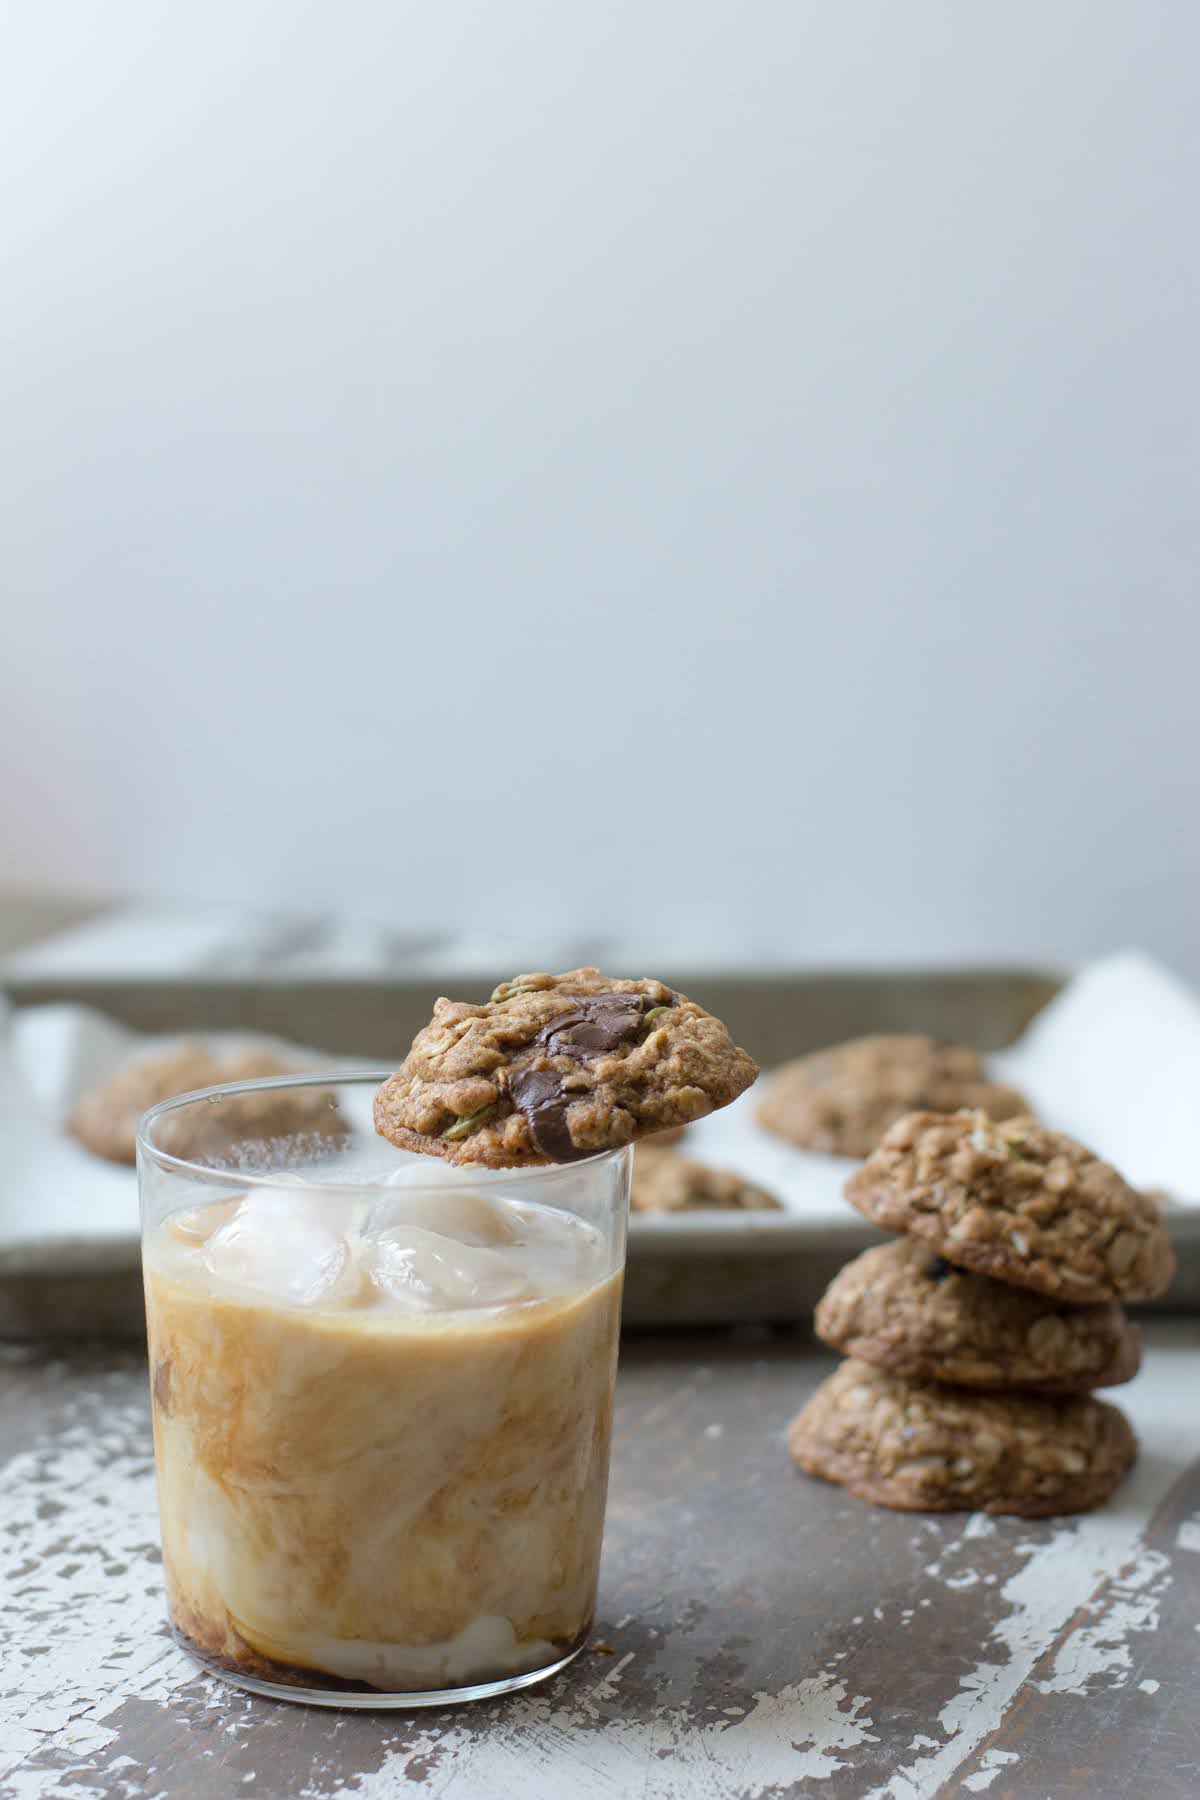 Trail mix cookie set on rim of iced coffee glass, next to stack of cookies